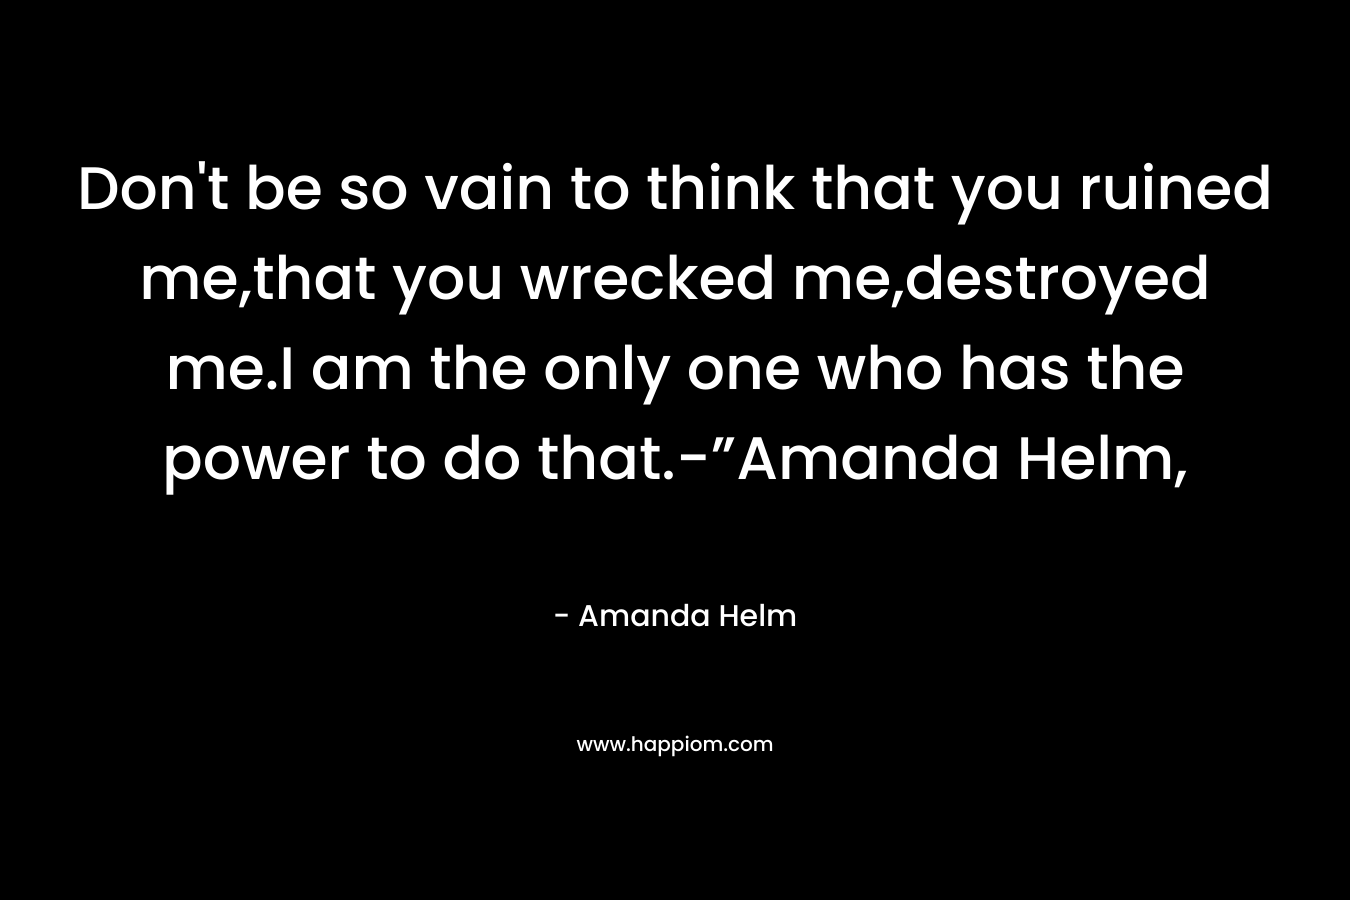 Don’t be so vain to think that you ruined me,that you wrecked me,destroyed me.I am the only one who has the power to do that.-”Amanda Helm, – Amanda Helm